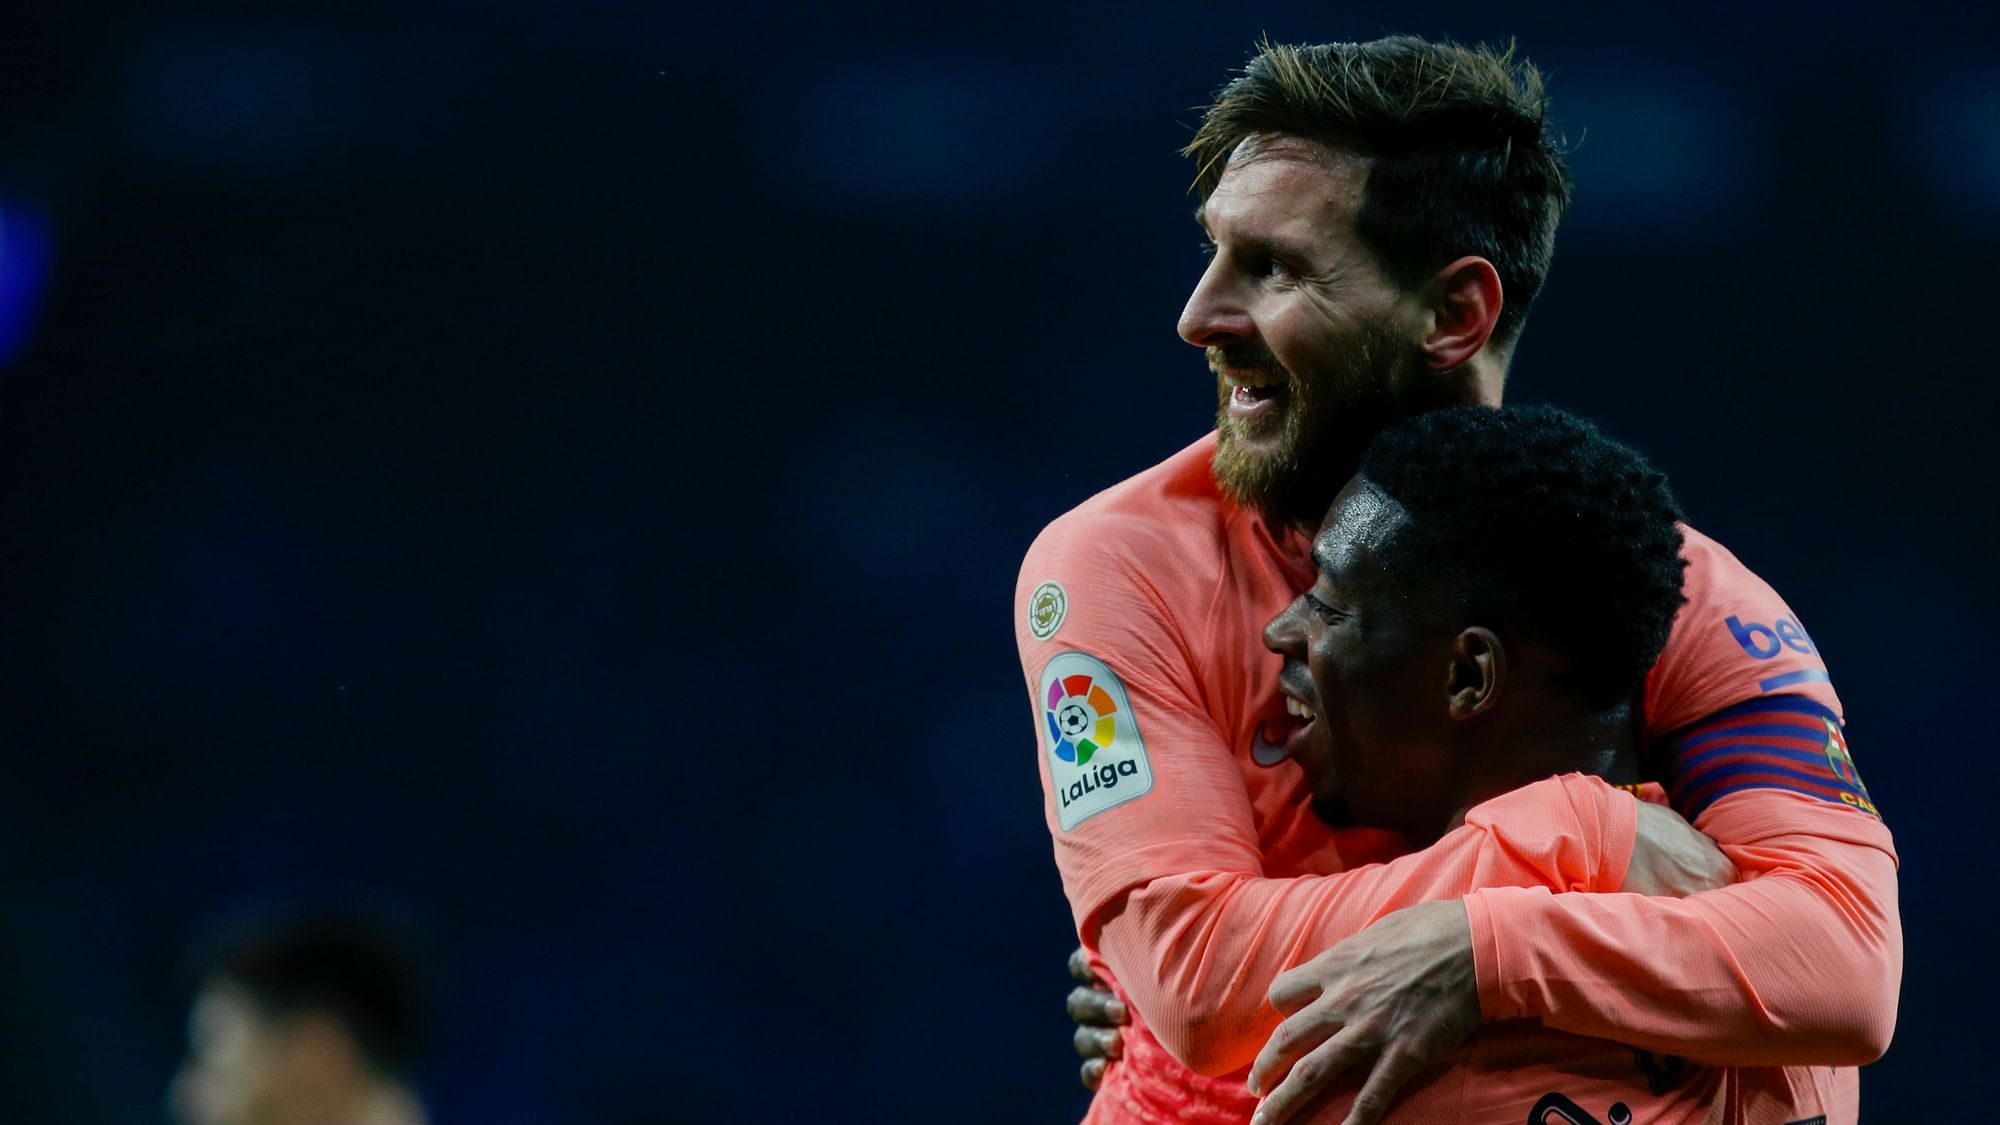 FC Barcelona’s Lionel Messi celebrates with teammate Ousmane Dembele during the Spanish La Liga soccer match between Espanyol and FC Barcelona.